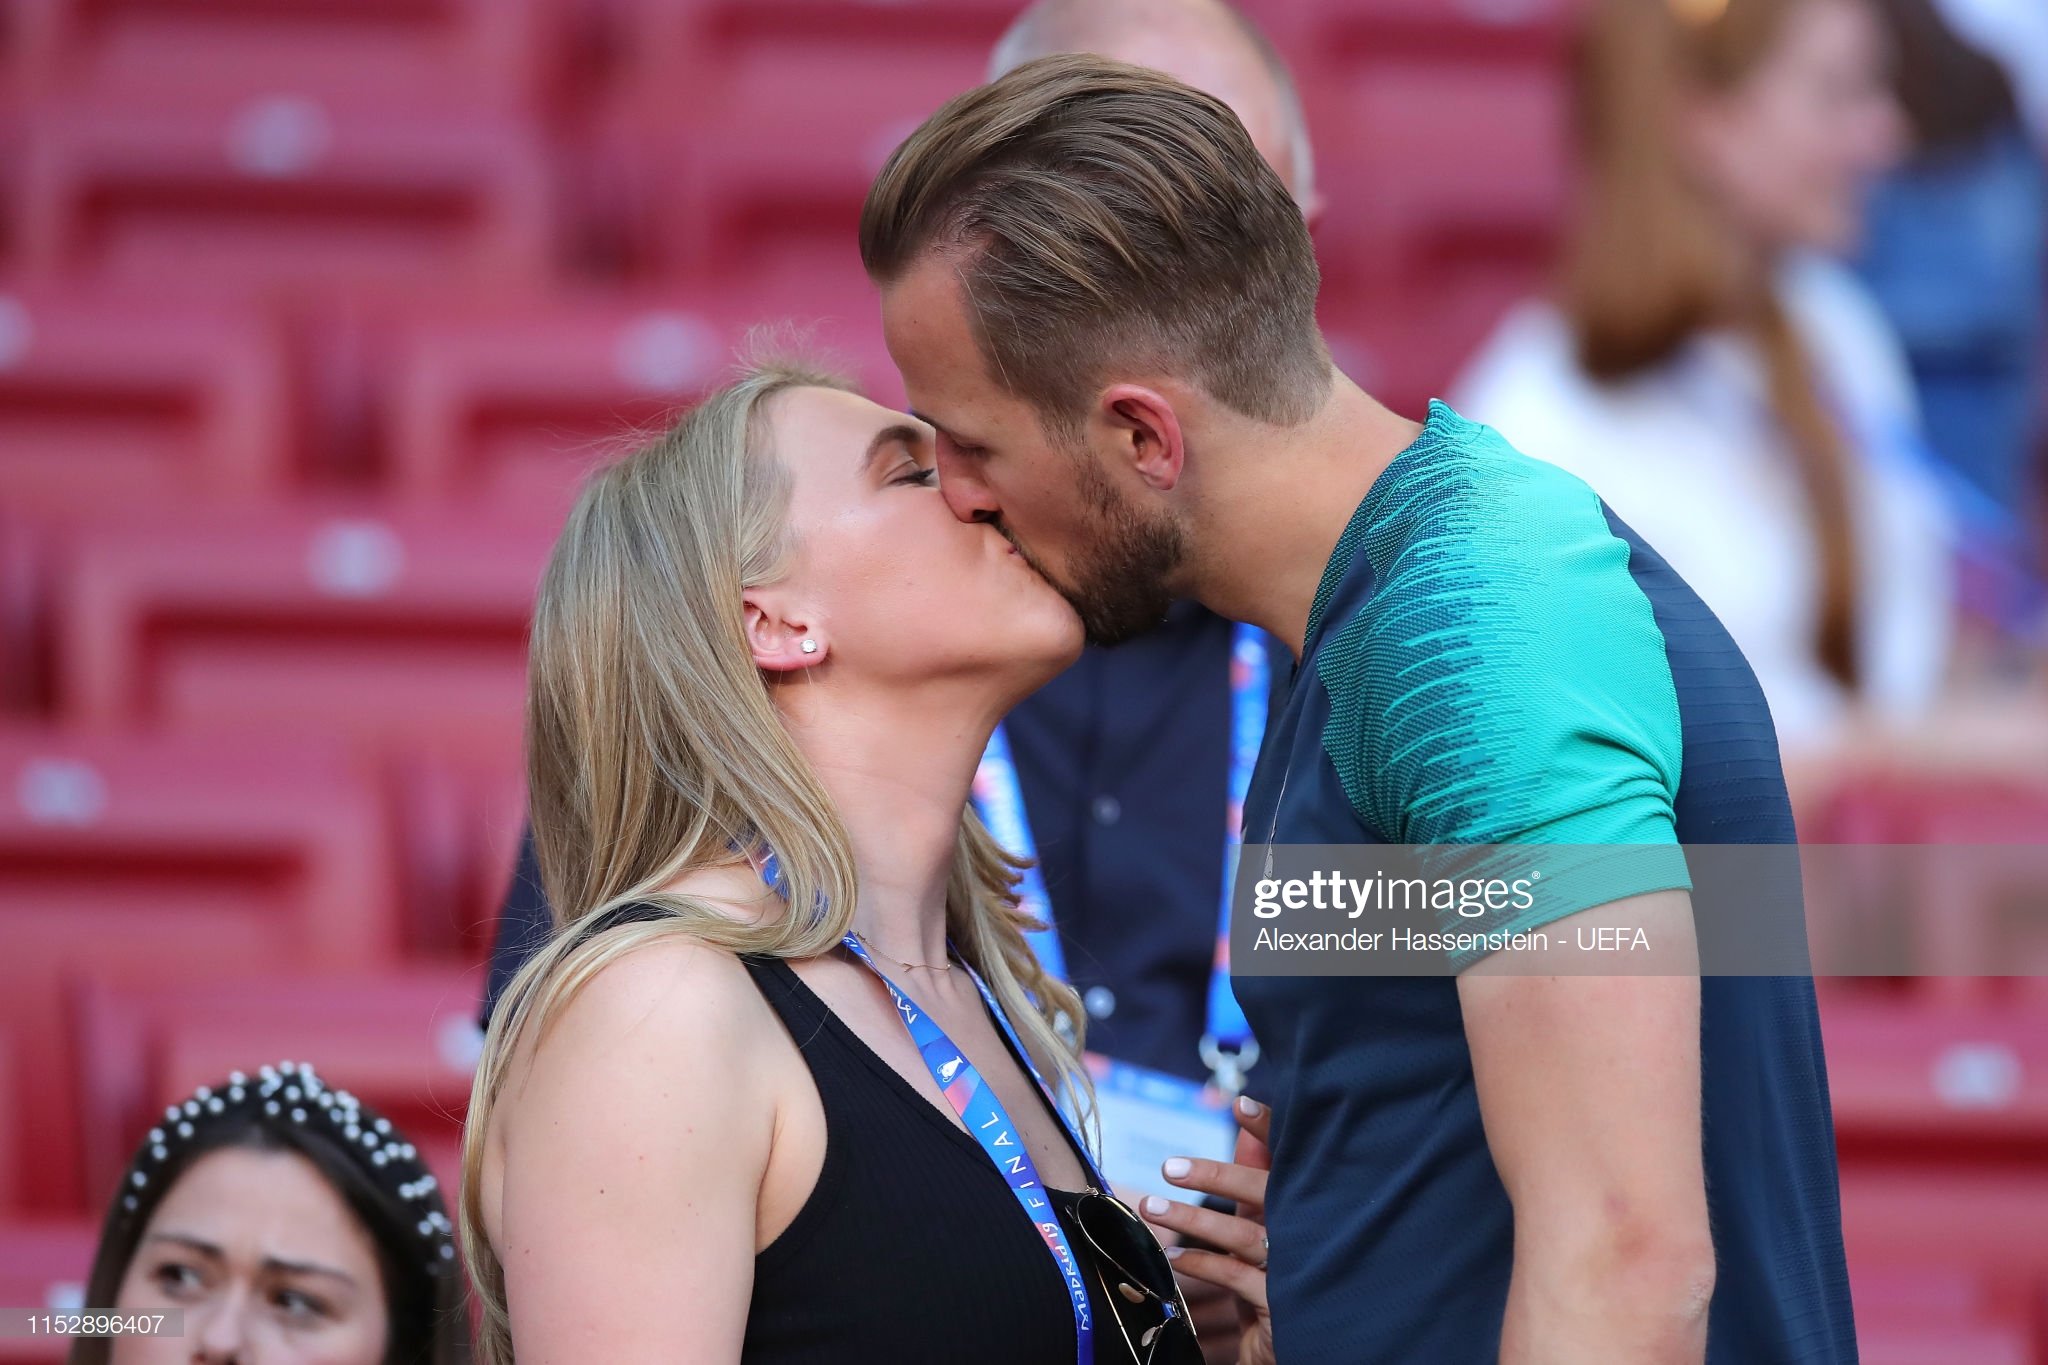 gettyimages-1152896407-2048x2048.jpg